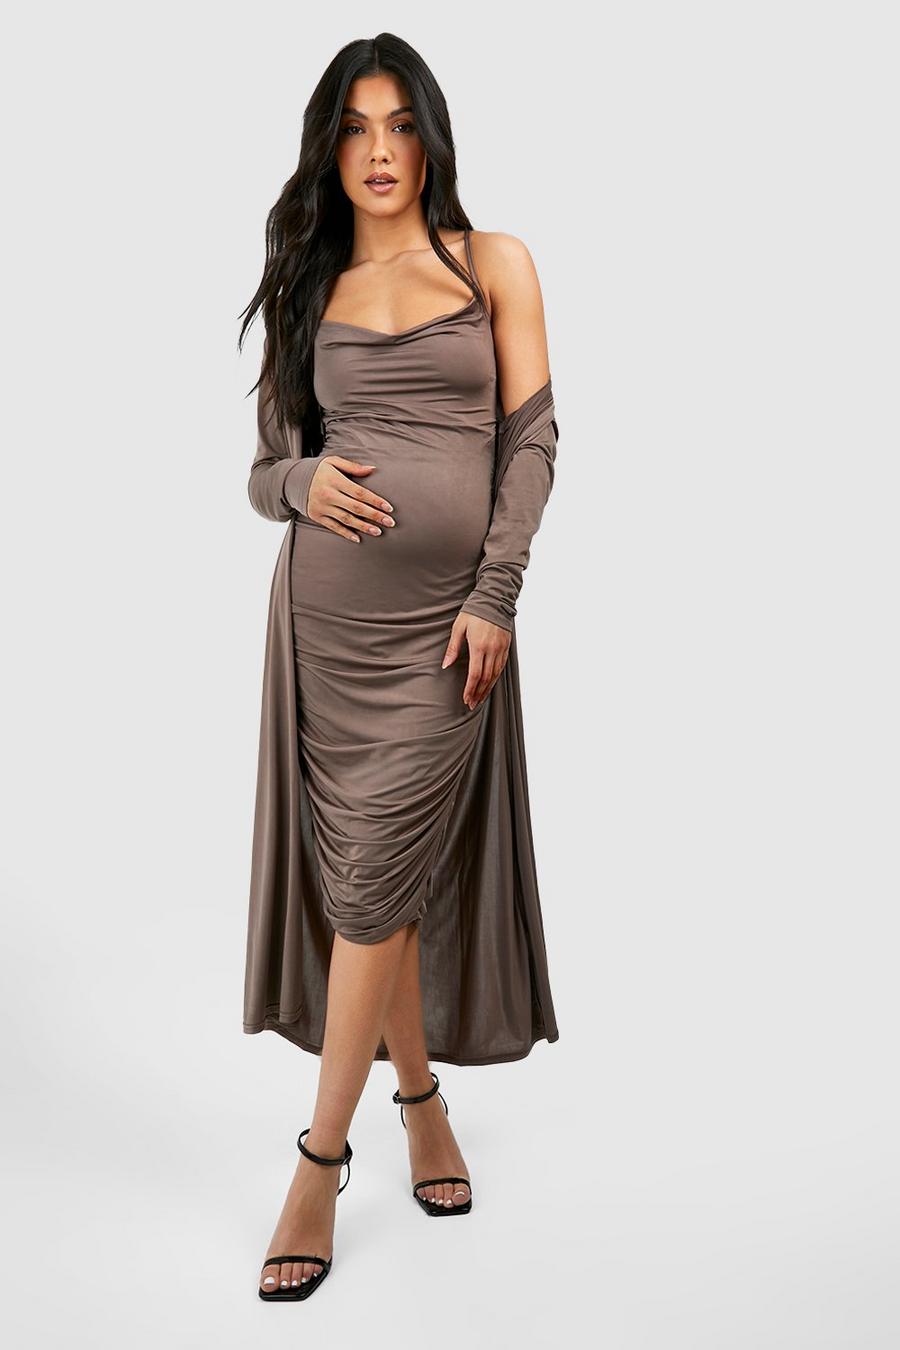 Maternity Shower Outfits | Baby Shower Dresses | UK